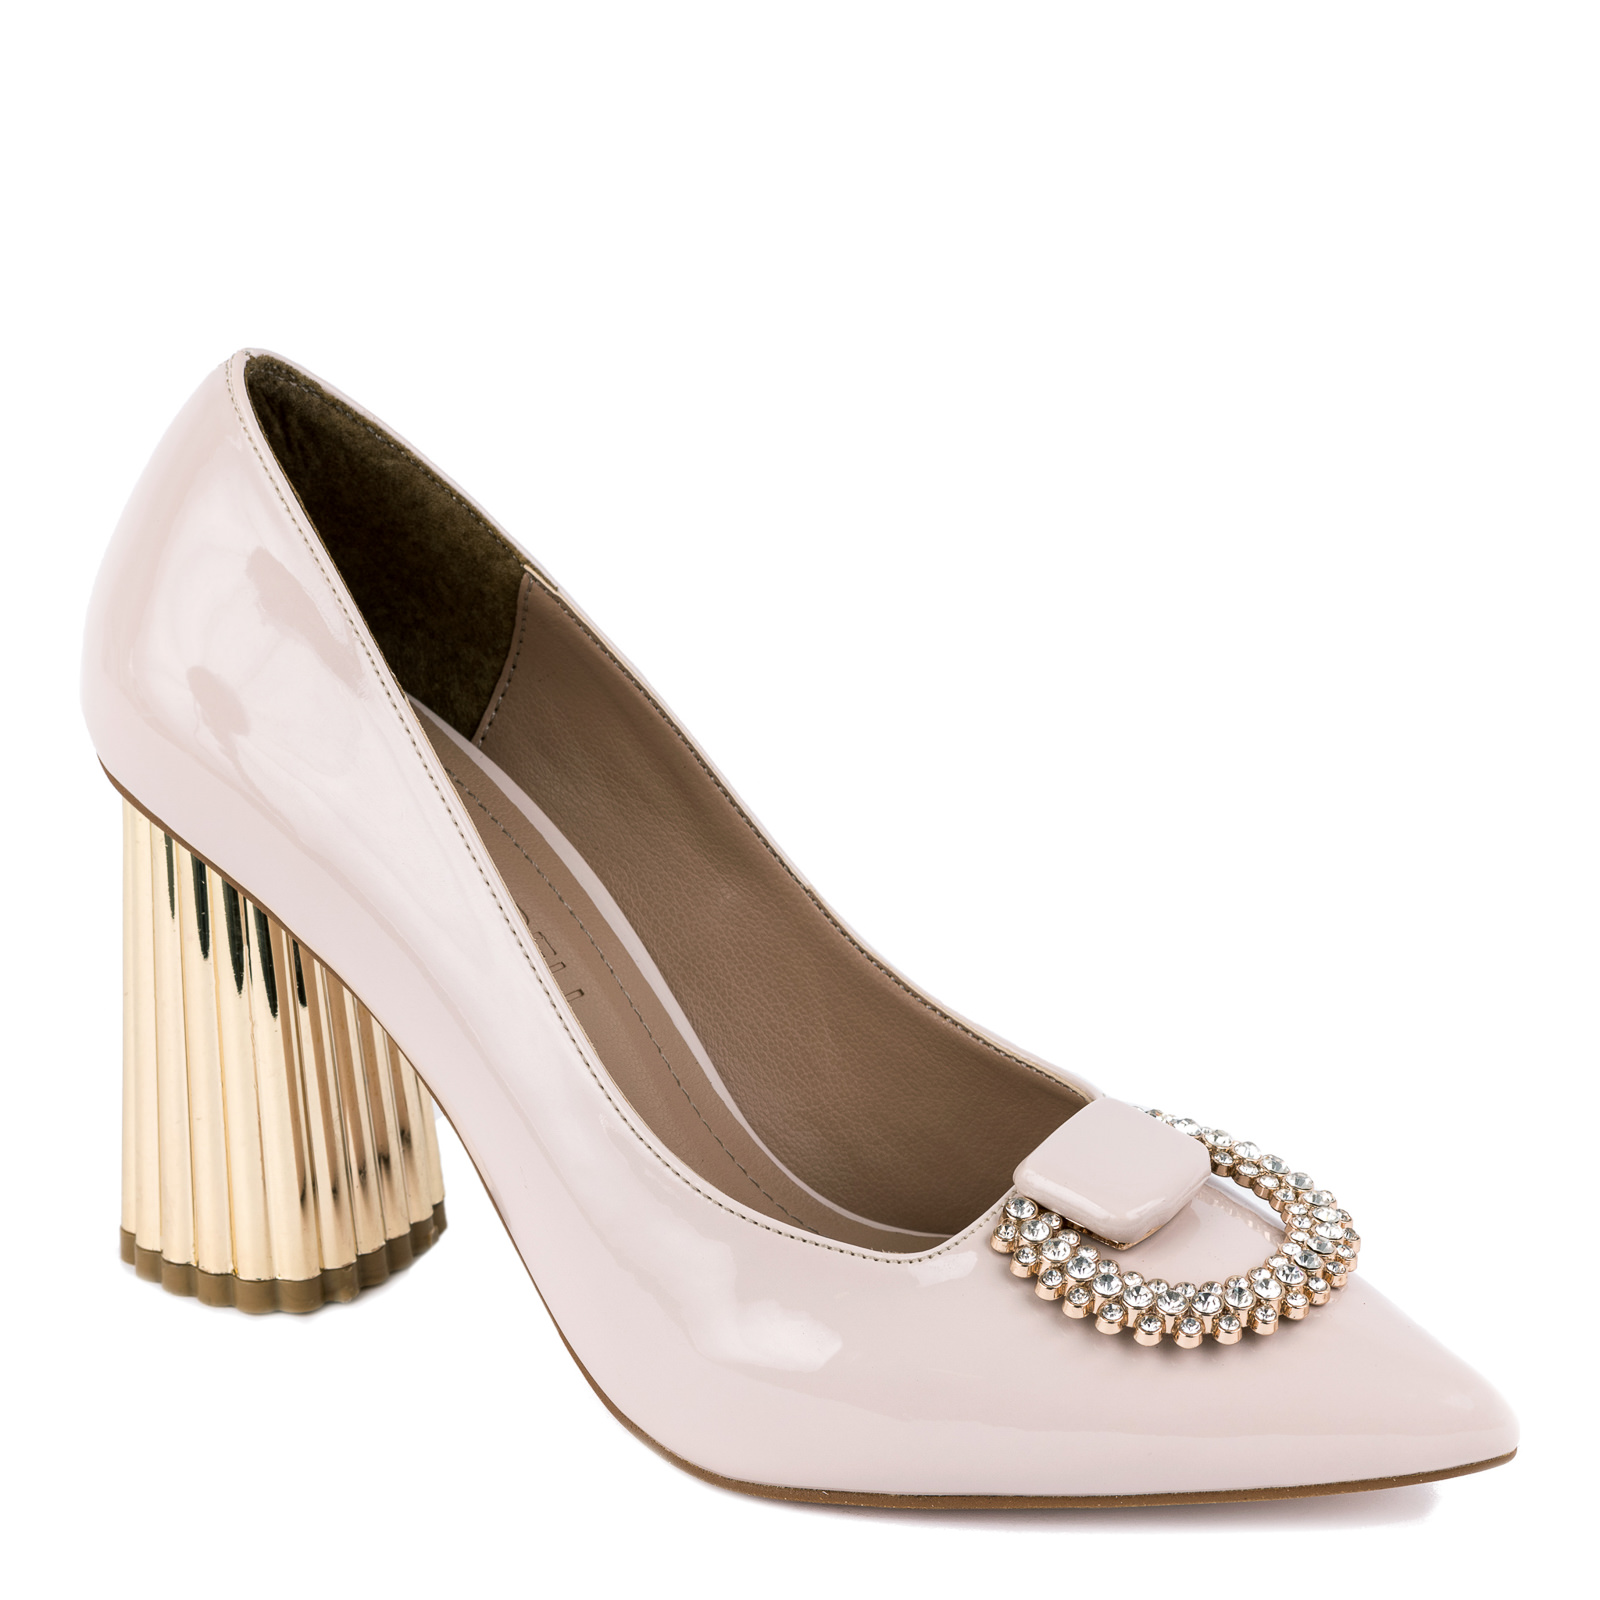 PATENT STILETTO SHOES WITH BROOCH AND BLOCK GOLDEN HEEL - BEIGE